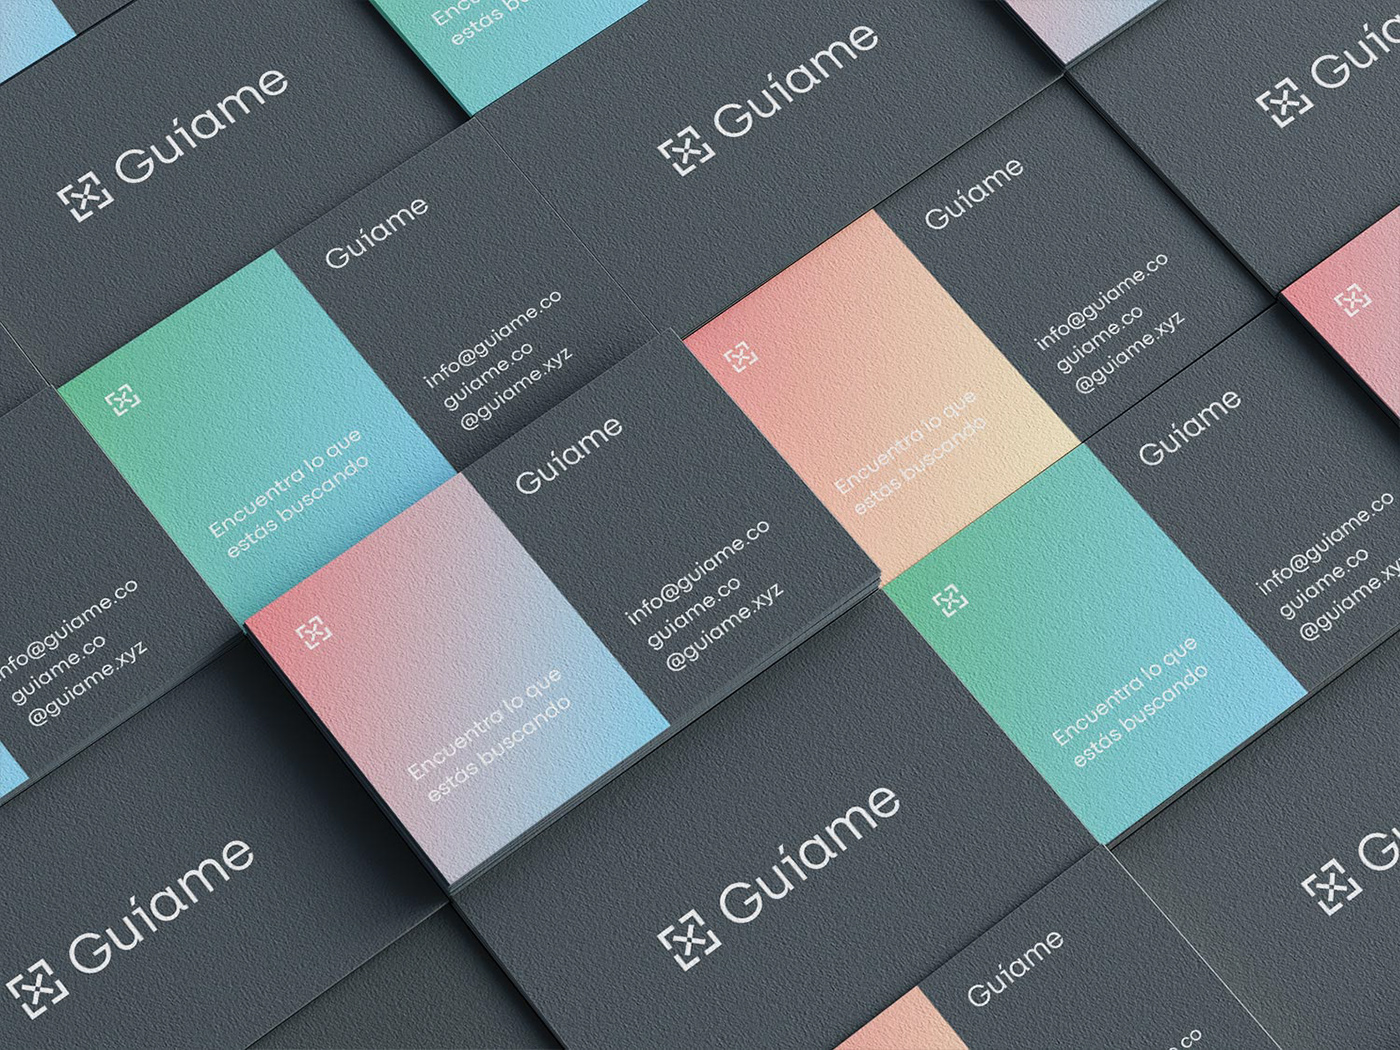 Redesign of the visual identity for Guíame, an app that connects people with places and experiences.